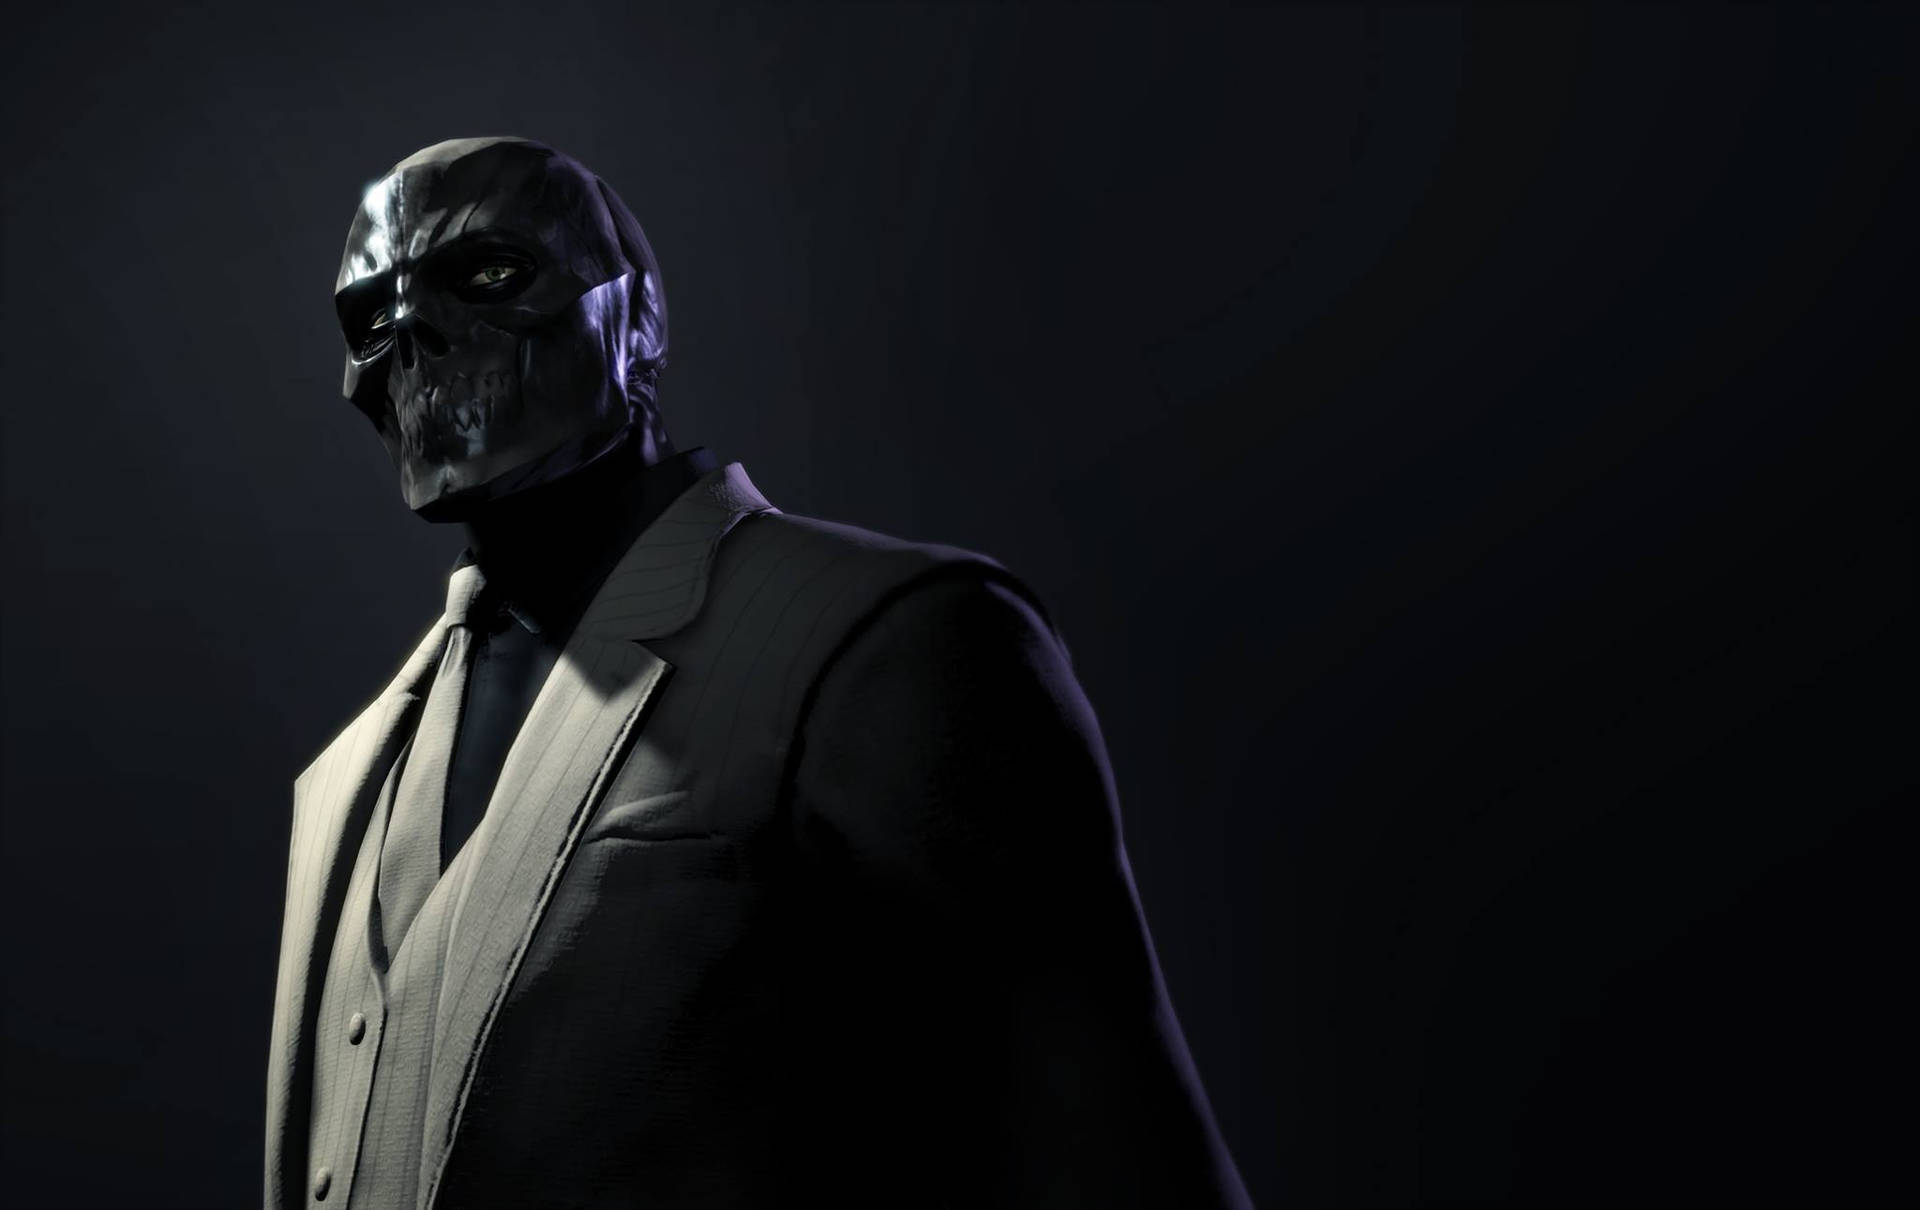 A Man In A Suit And Mask Standing In A Dark Room Wallpaper